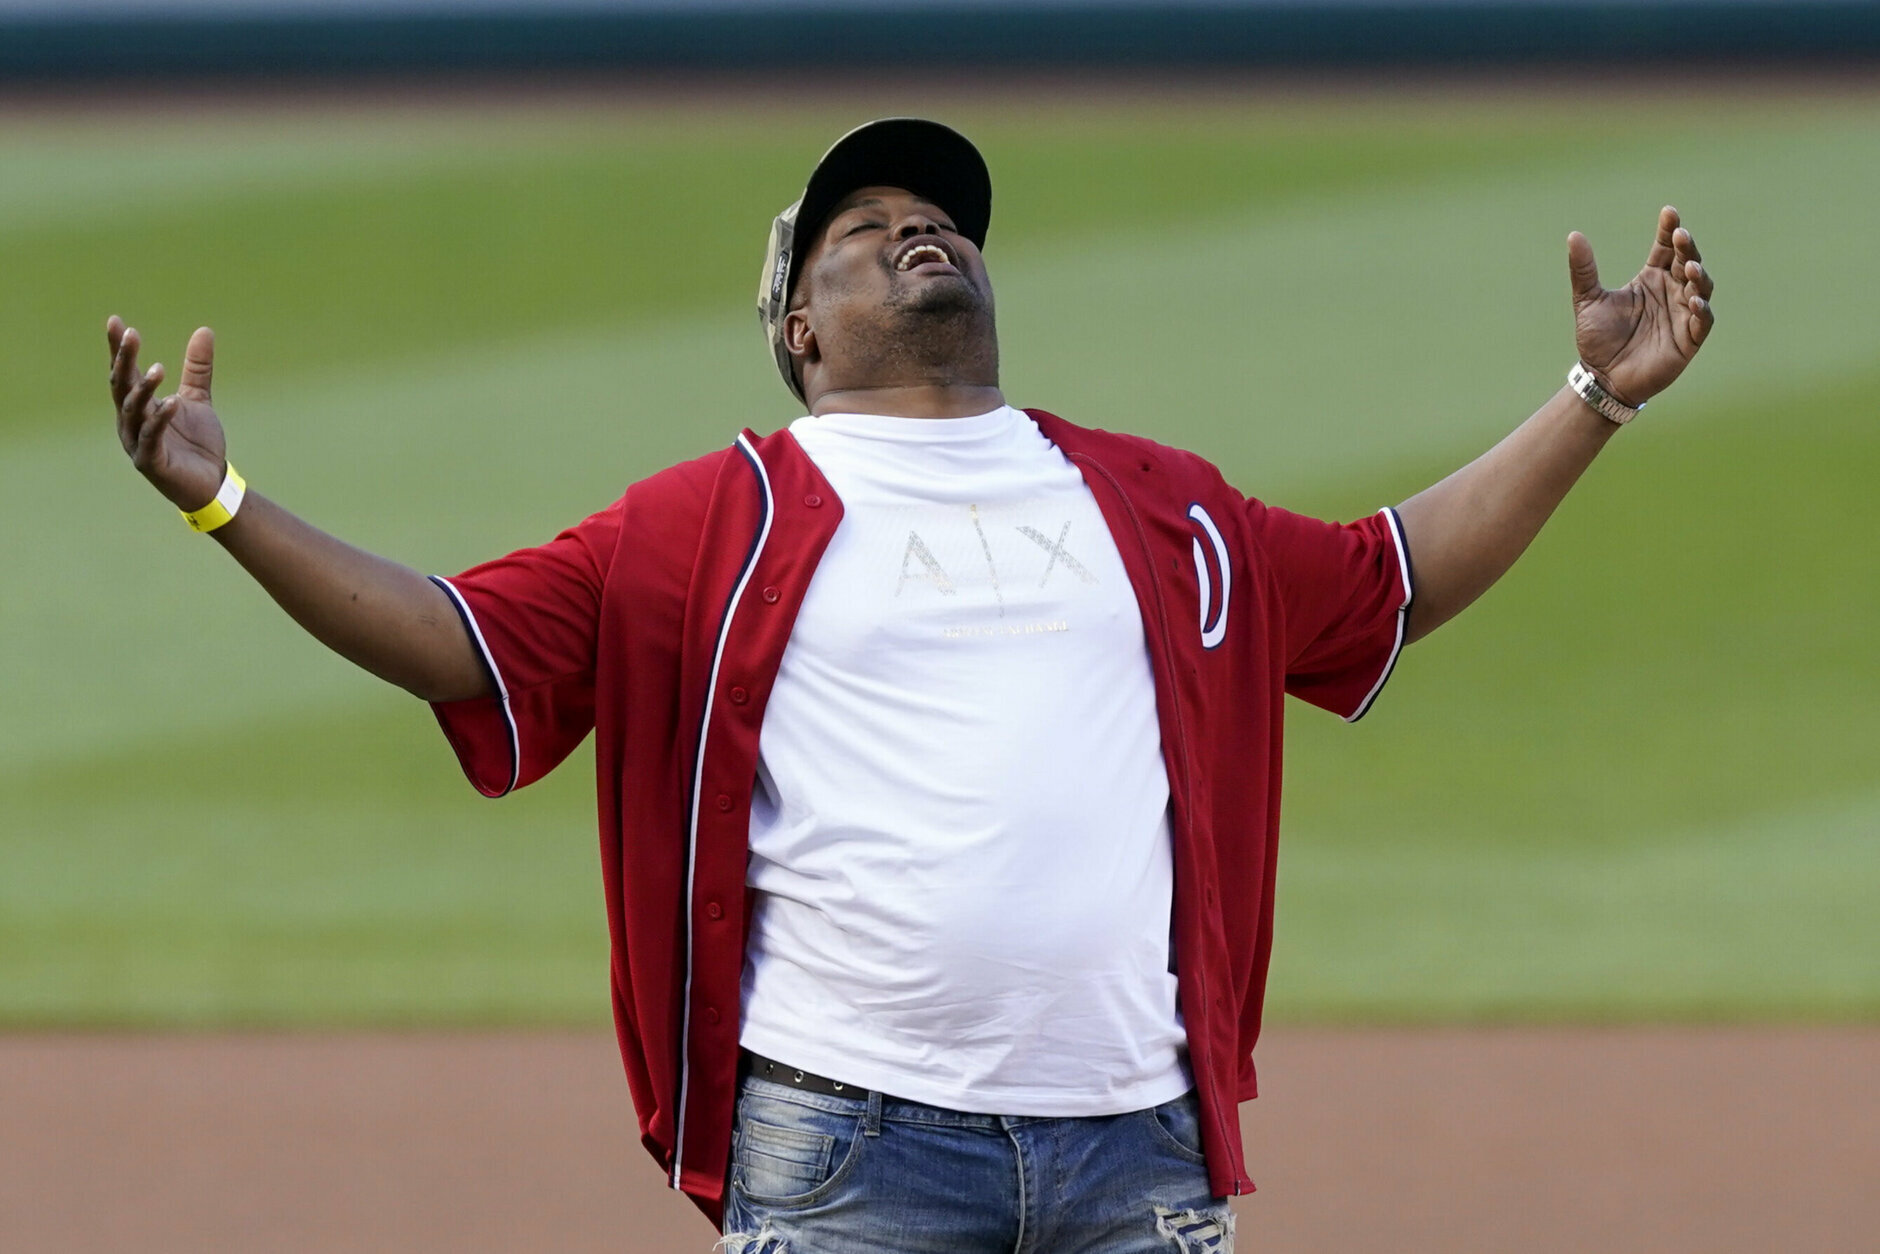 U.S. Capitol Police officer Eugene Goodman reacts after throwing out the first pitch before the Washington Nationals baseball game against the New York Mets, Friday, June 18, 2021, in Washington. (AP Photo/Carolyn Kaster)